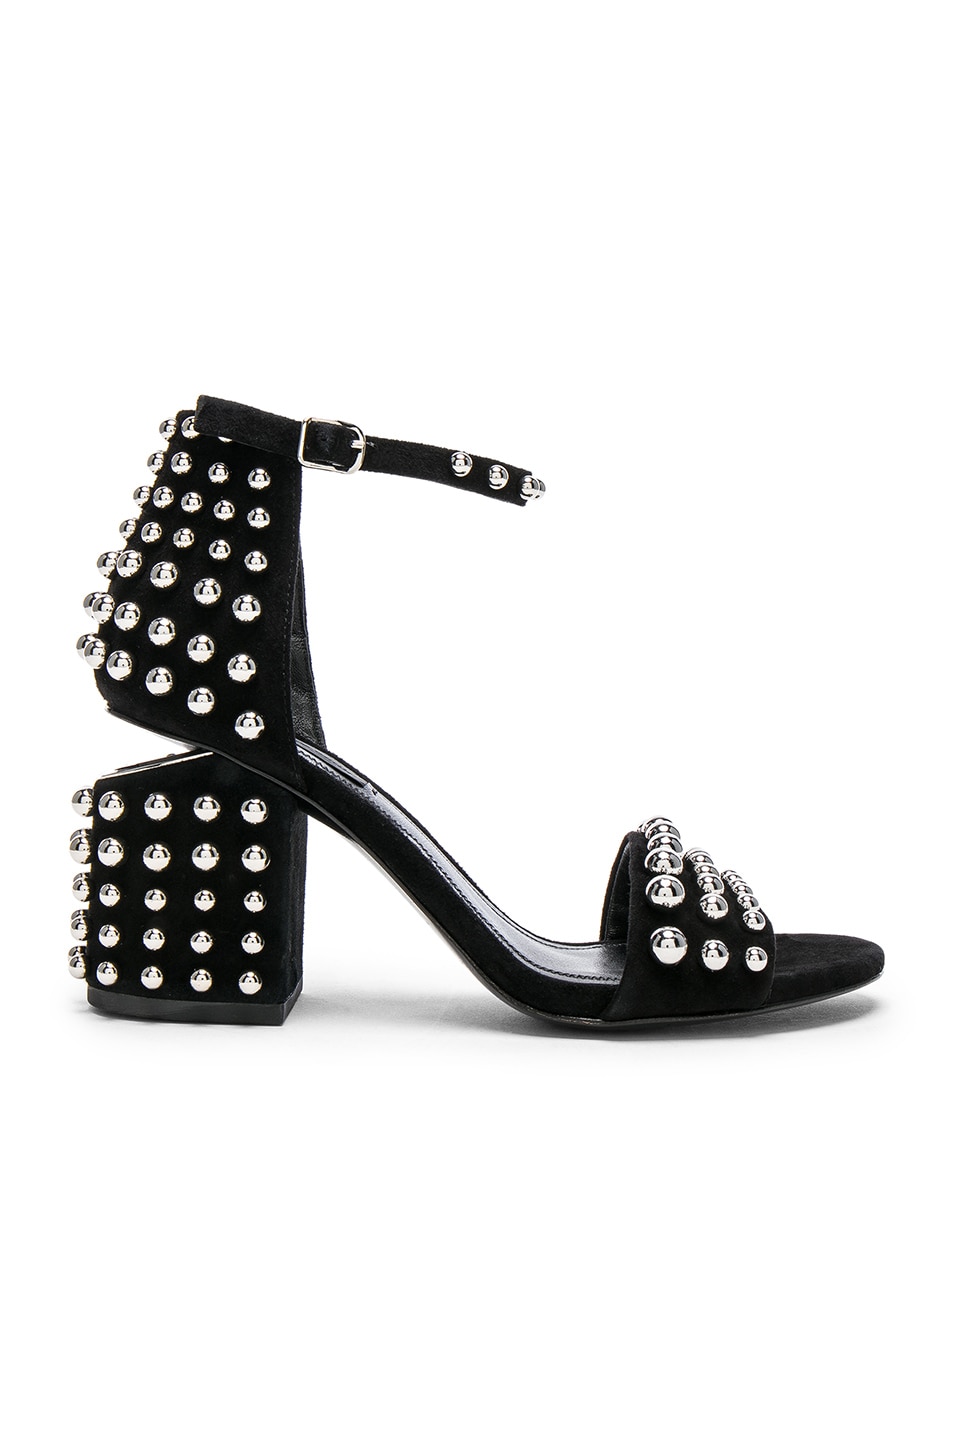 Image 1 of Alexander Wang Studded Suede Abby Sandals in Black